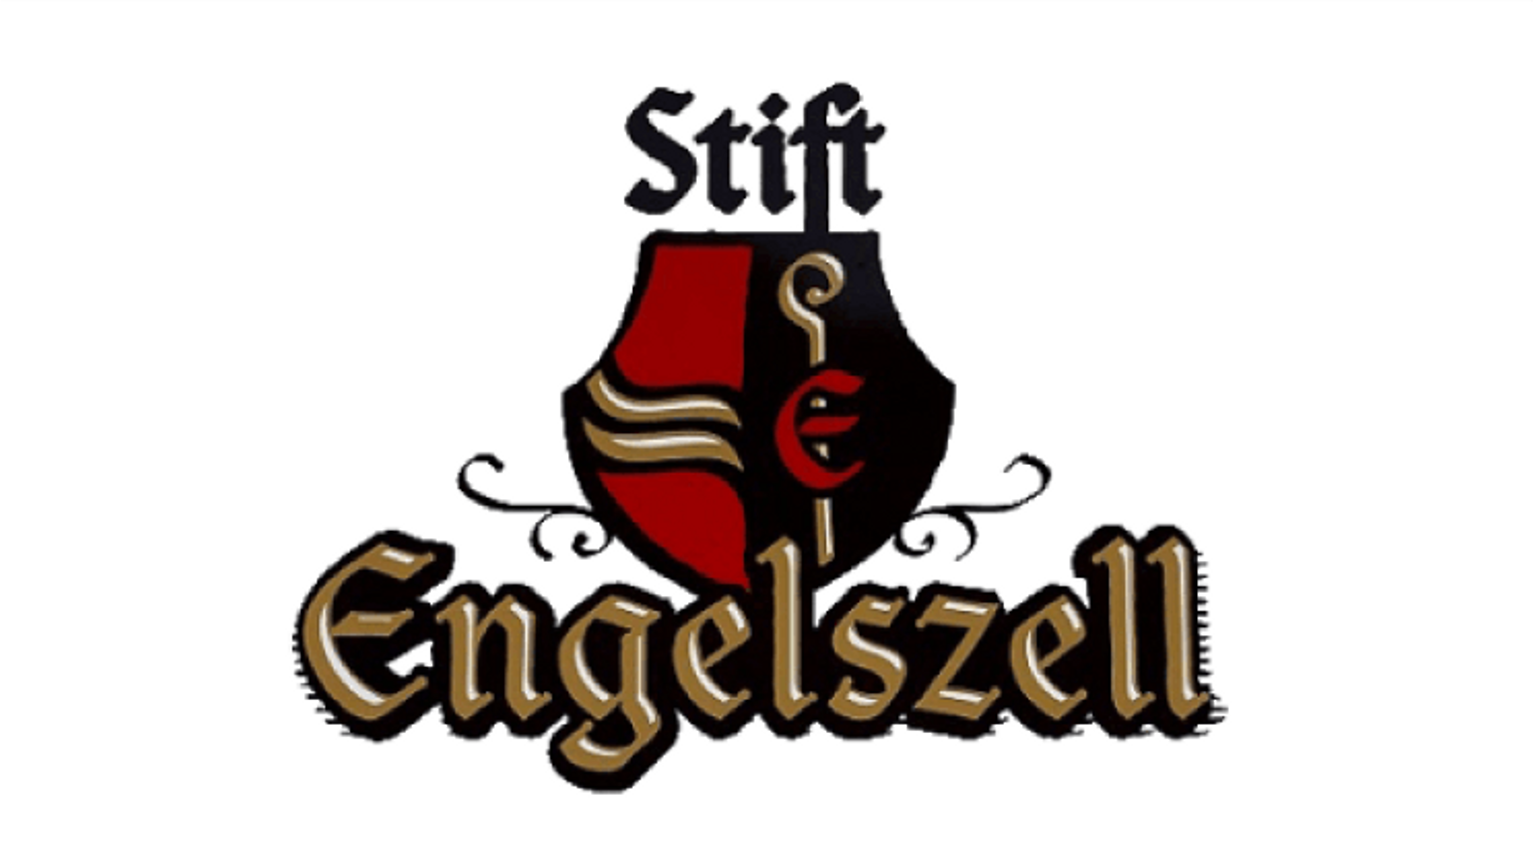 thumbnail for blog article named: Engelszell, Oostenrijks trappistenbier